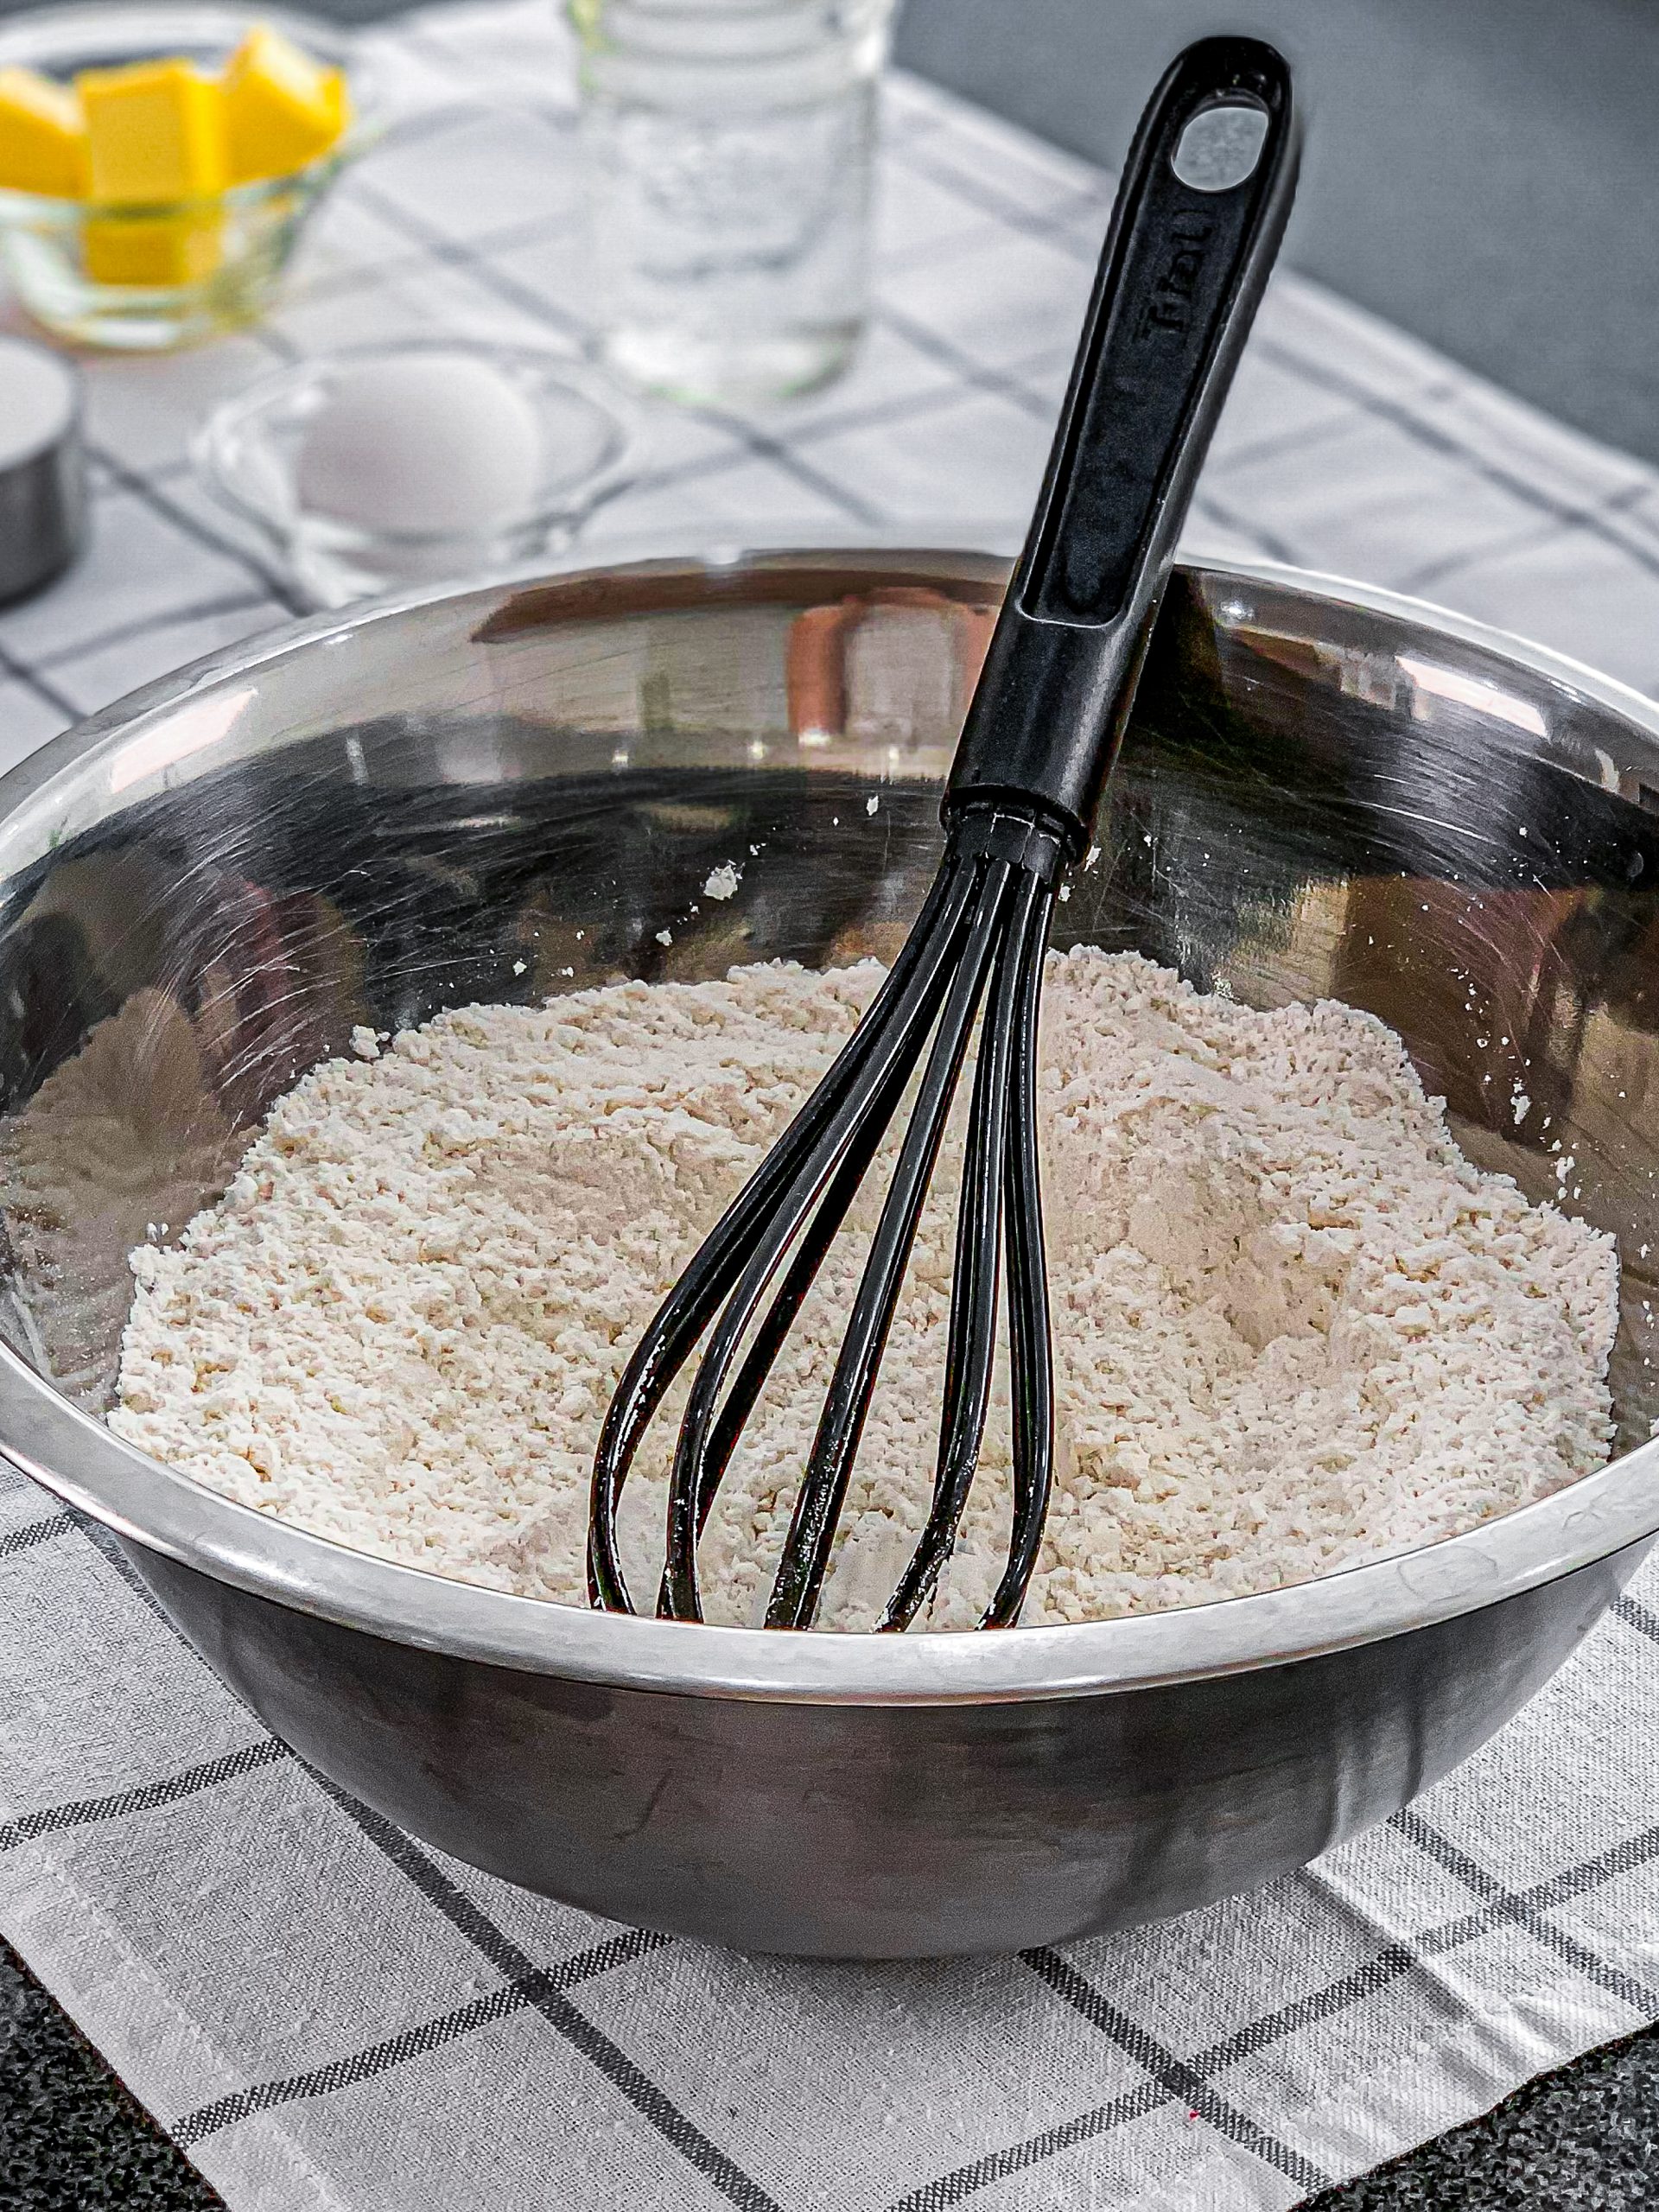 Mix flour and salt together in a large bowl with a whisk.